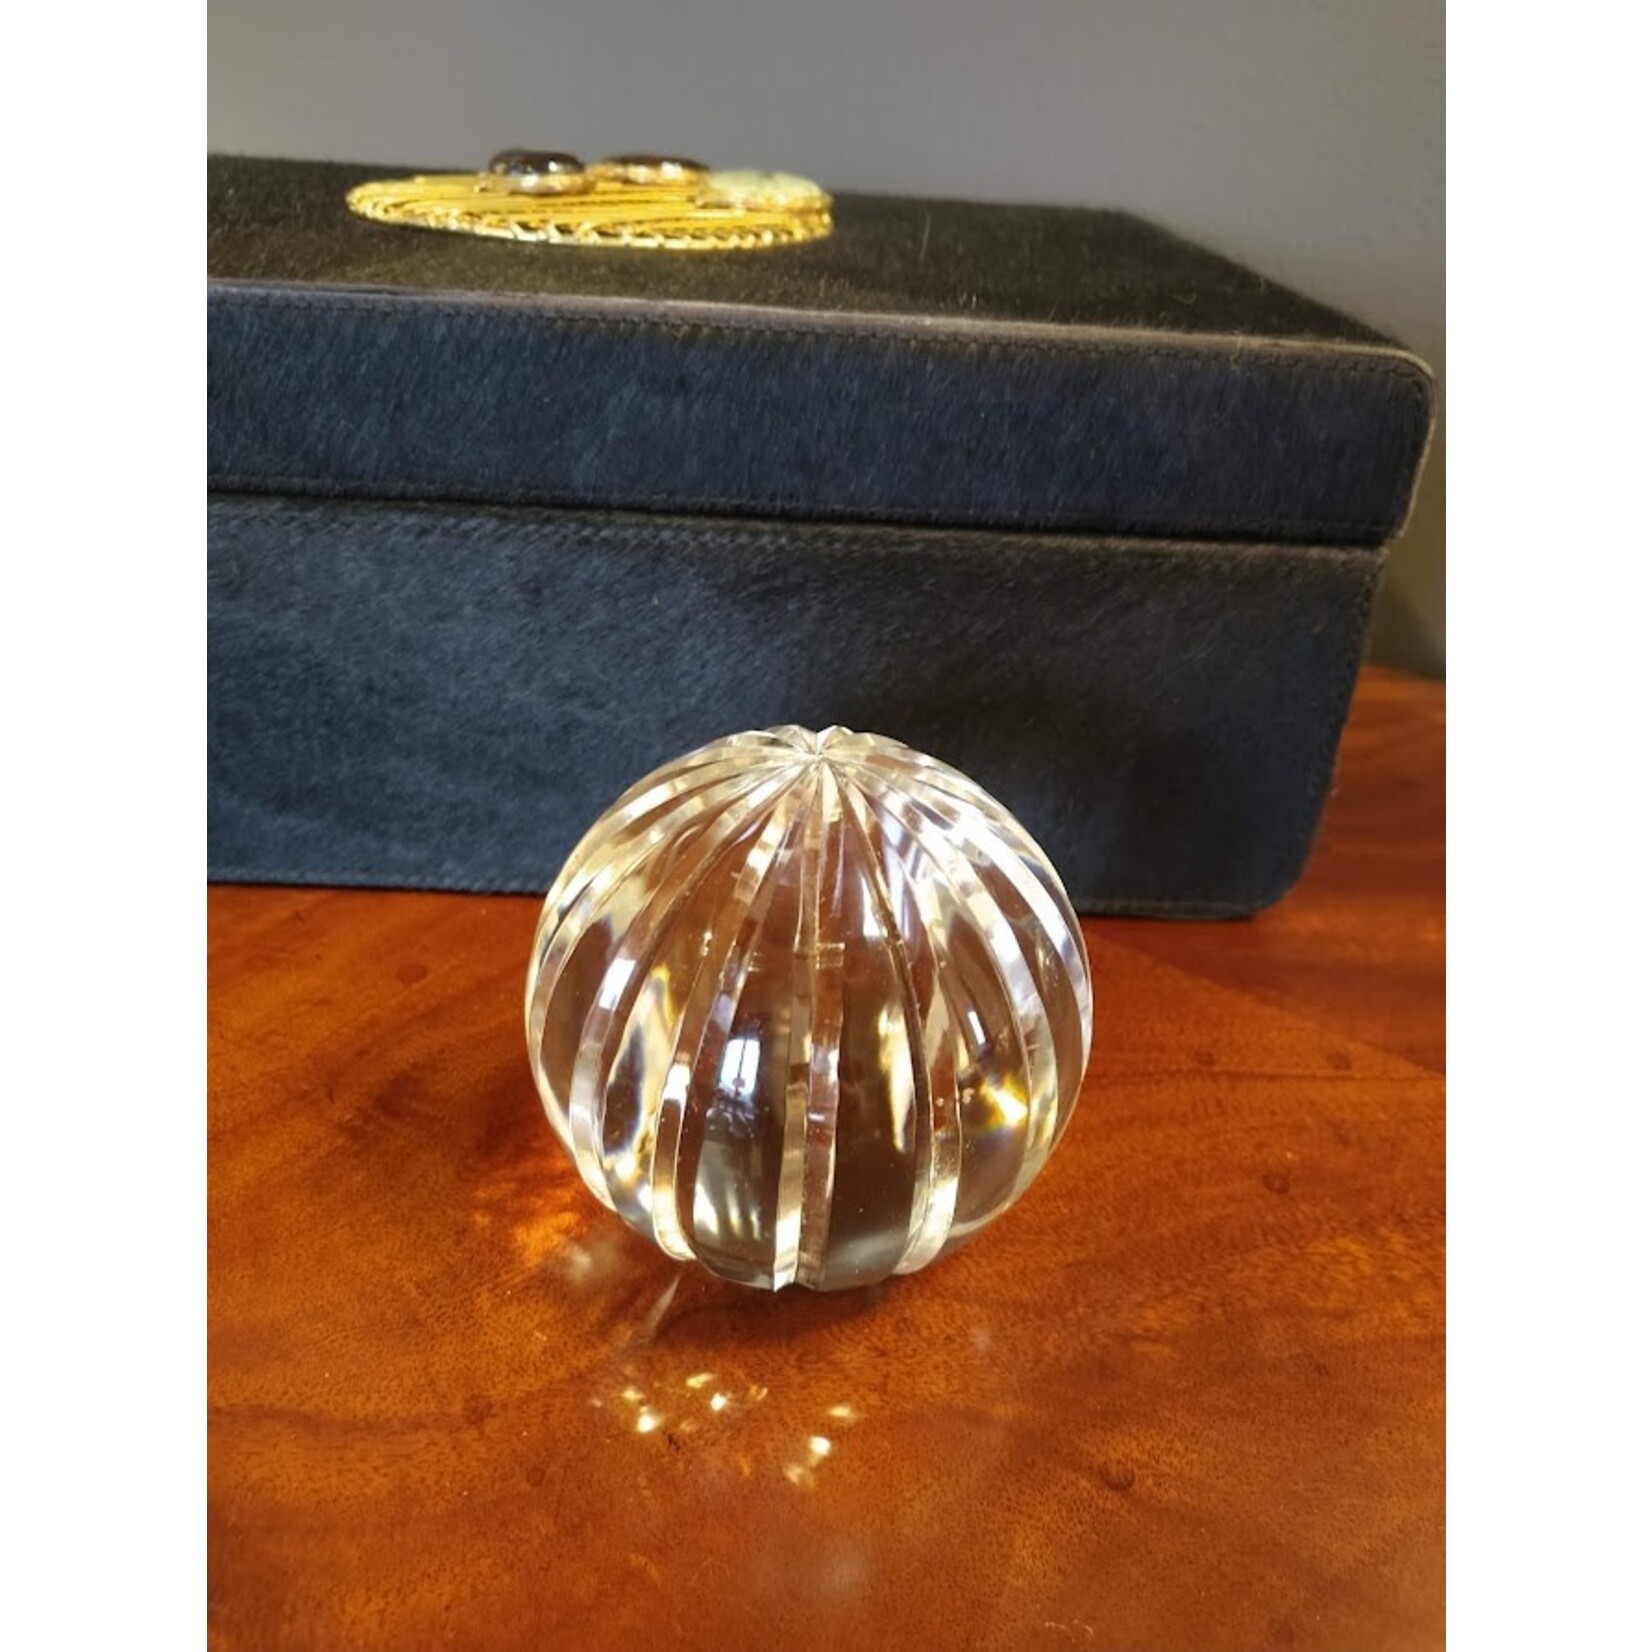 Tozai Lead Crystal Paperweight